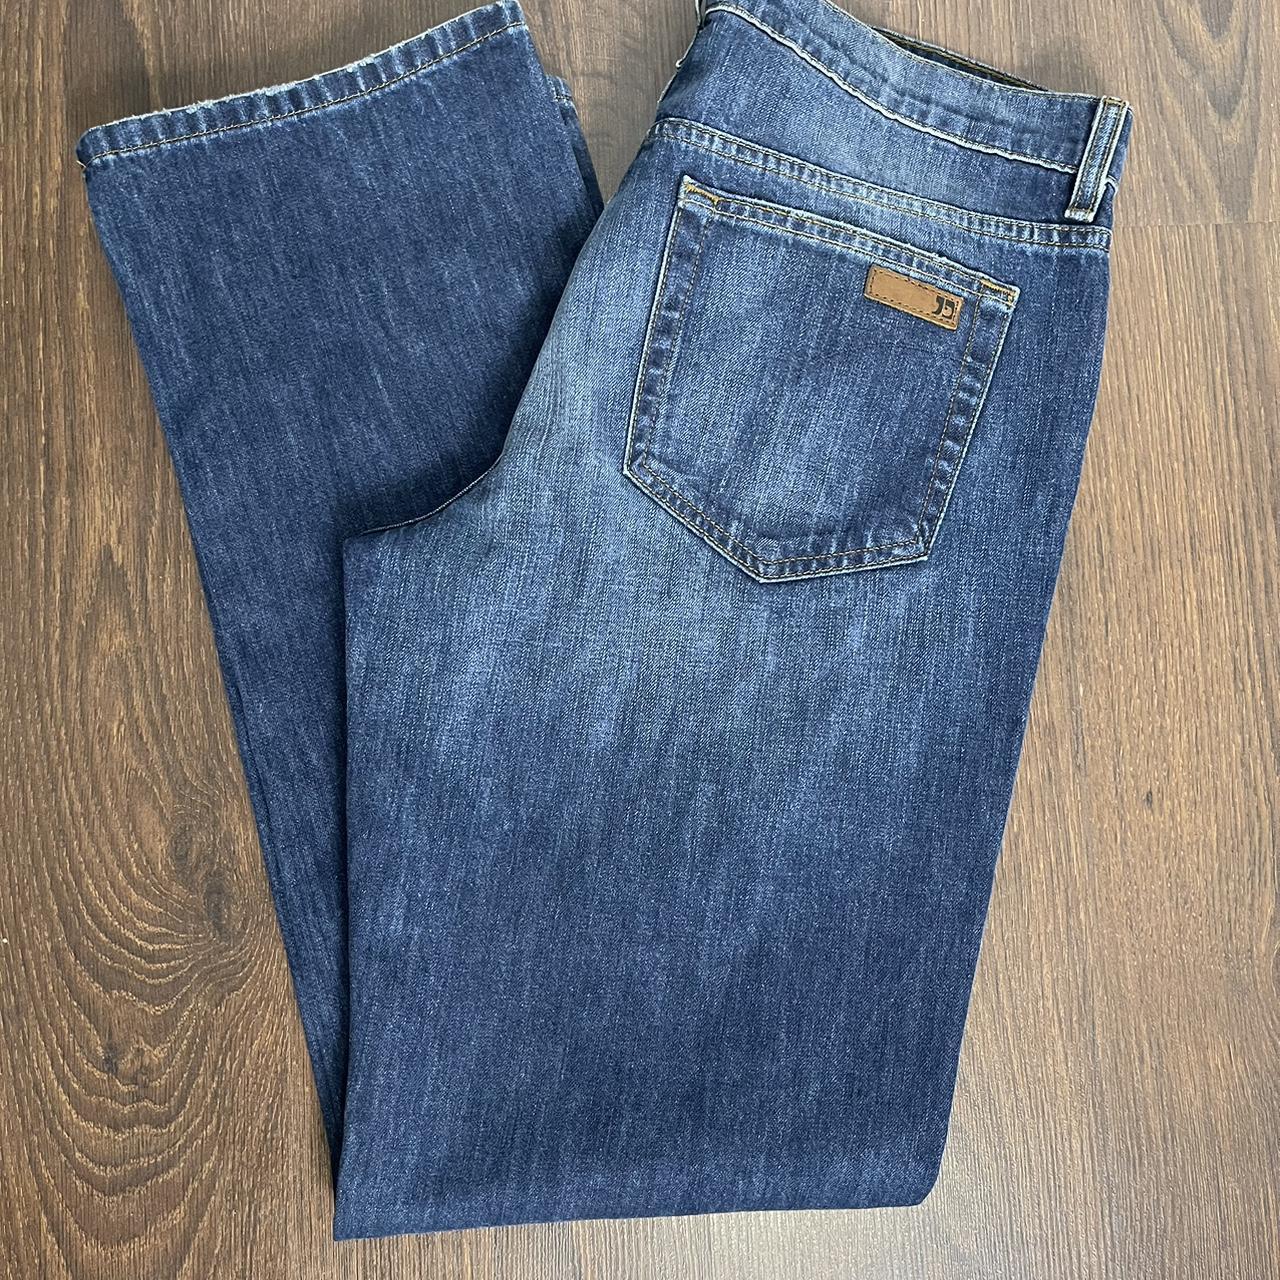 Men’s Joes Mabel Relaxed Fit Jeans Size 34X33.... - Depop